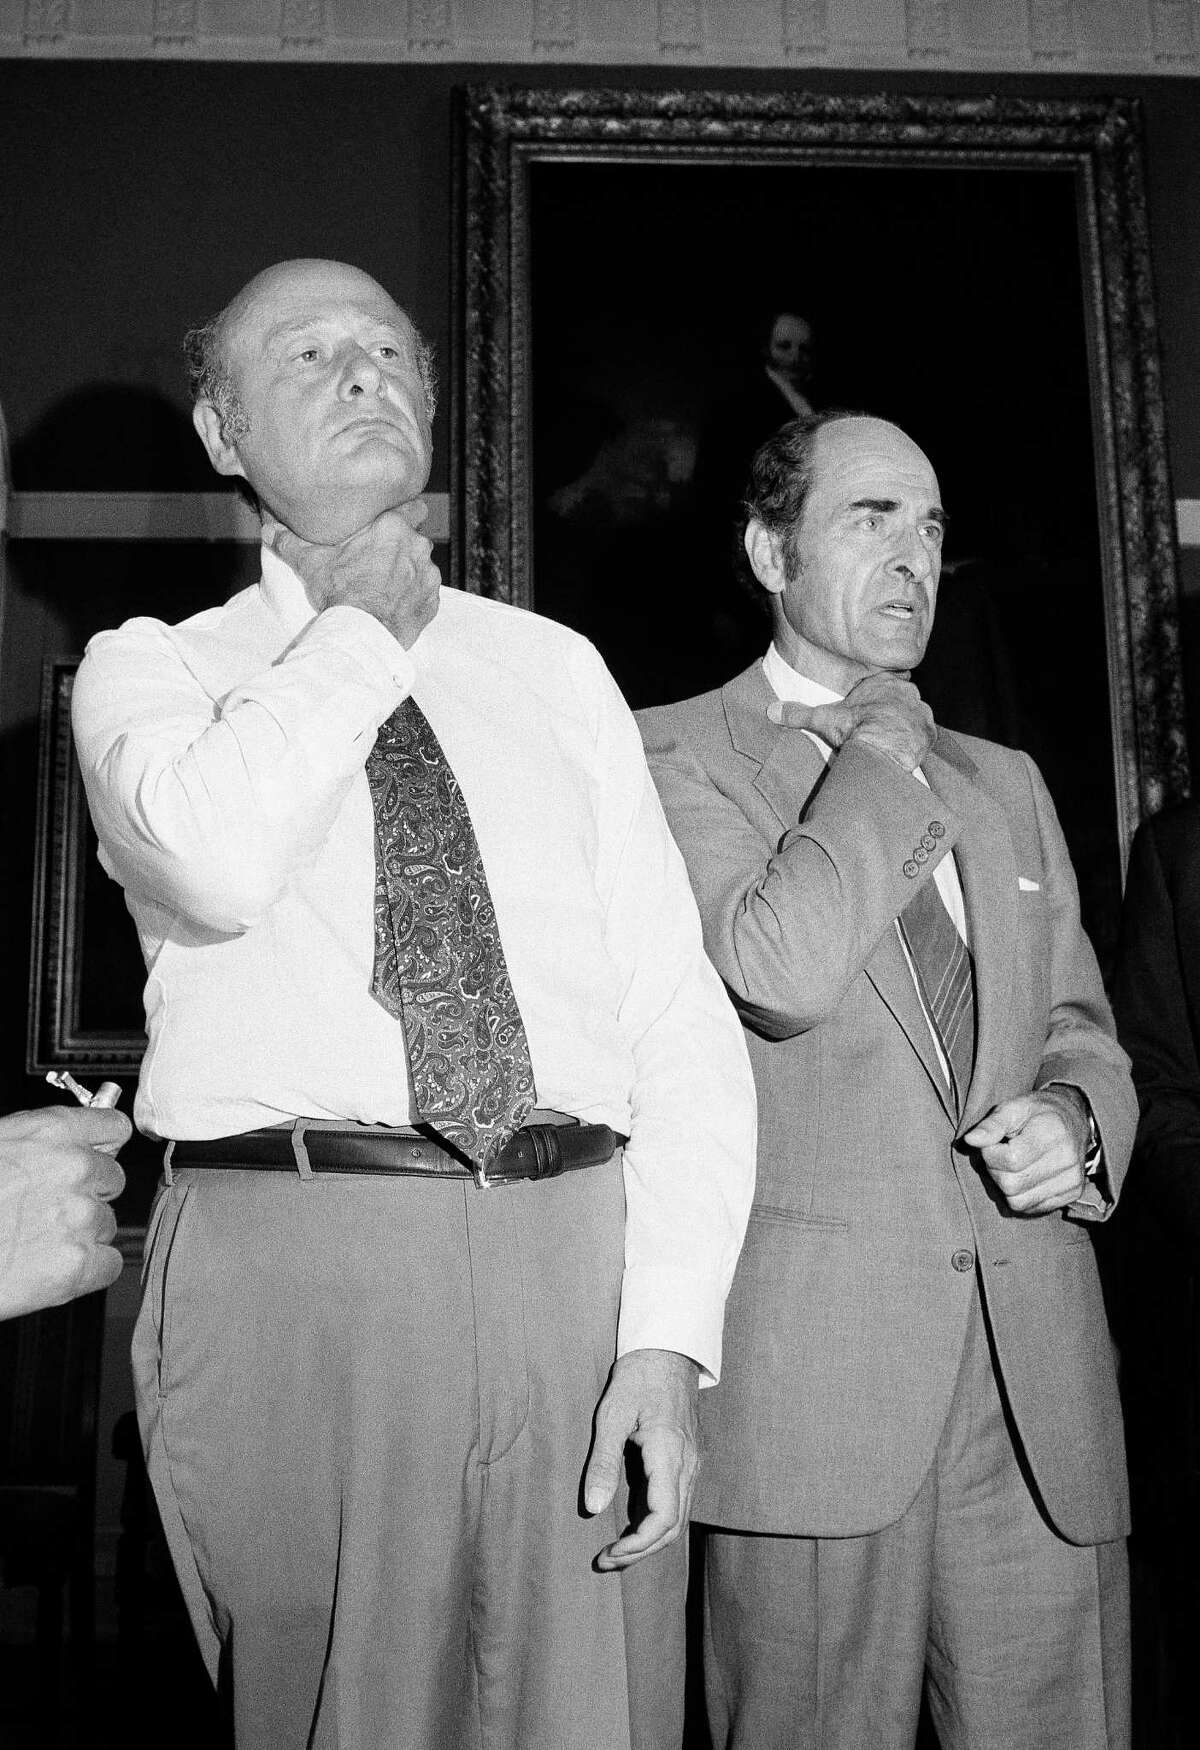 Dr. Henry Heimlich, right, and Mayor Edward Koch demonstrate how a chocking victim should signal for help at New York’s City Hall during Heimlich’s discussion of his Heimlich Maneuver.